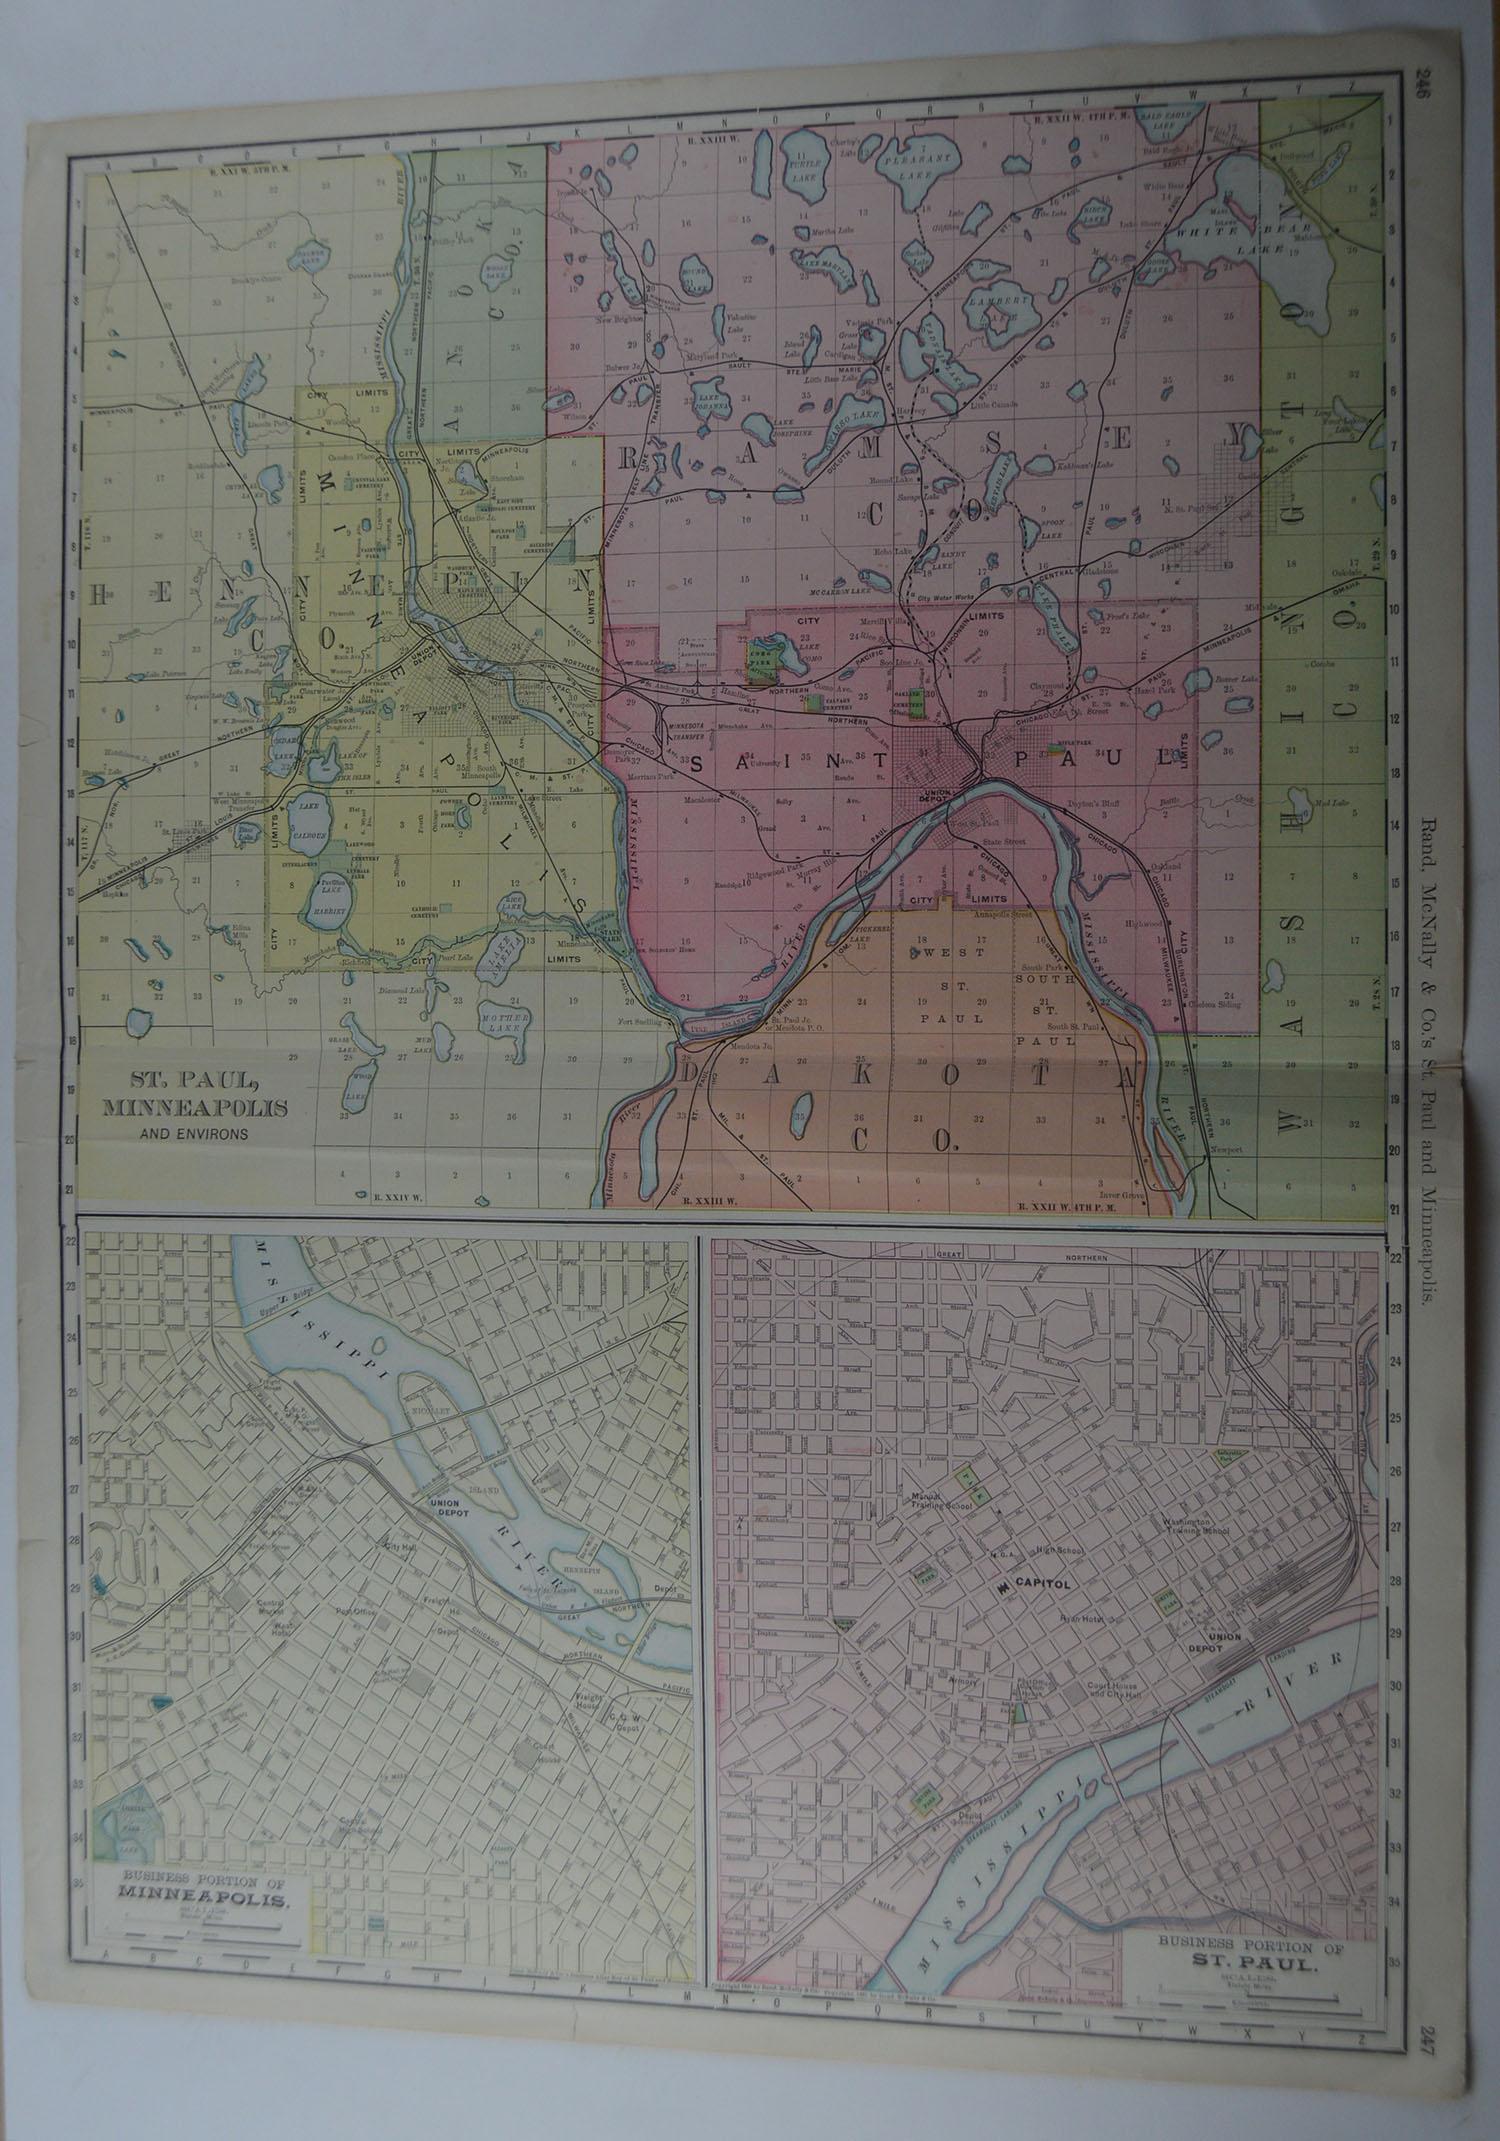 Other Large Original Antique City Plan of Minneapolis and St Paul, USA, circa 1900